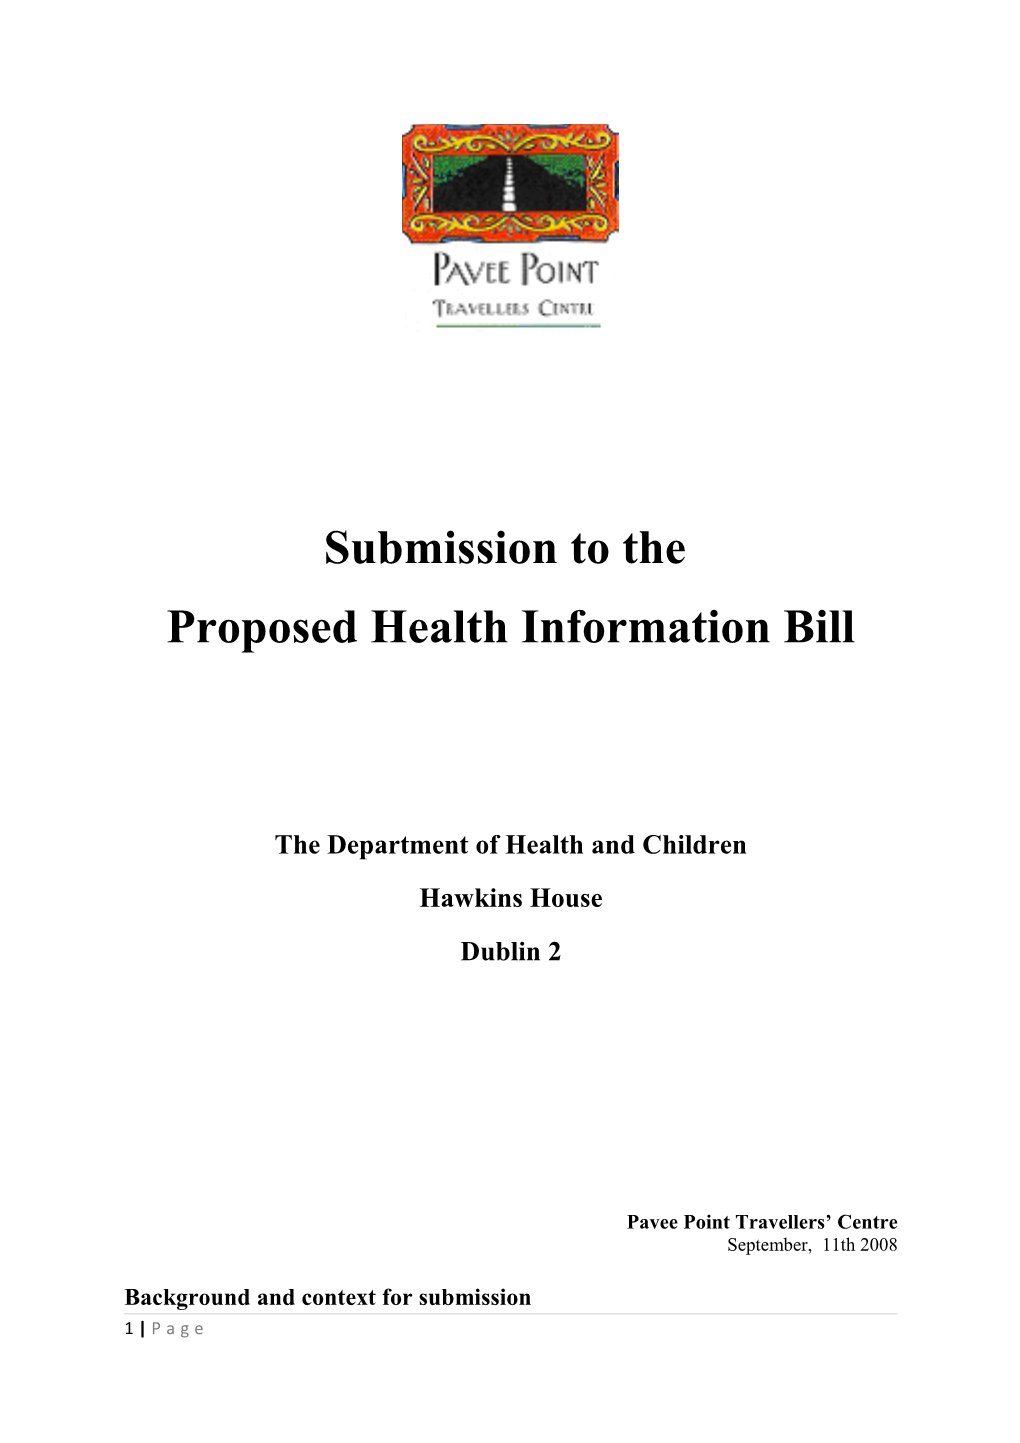 Proposed Health Information Bill